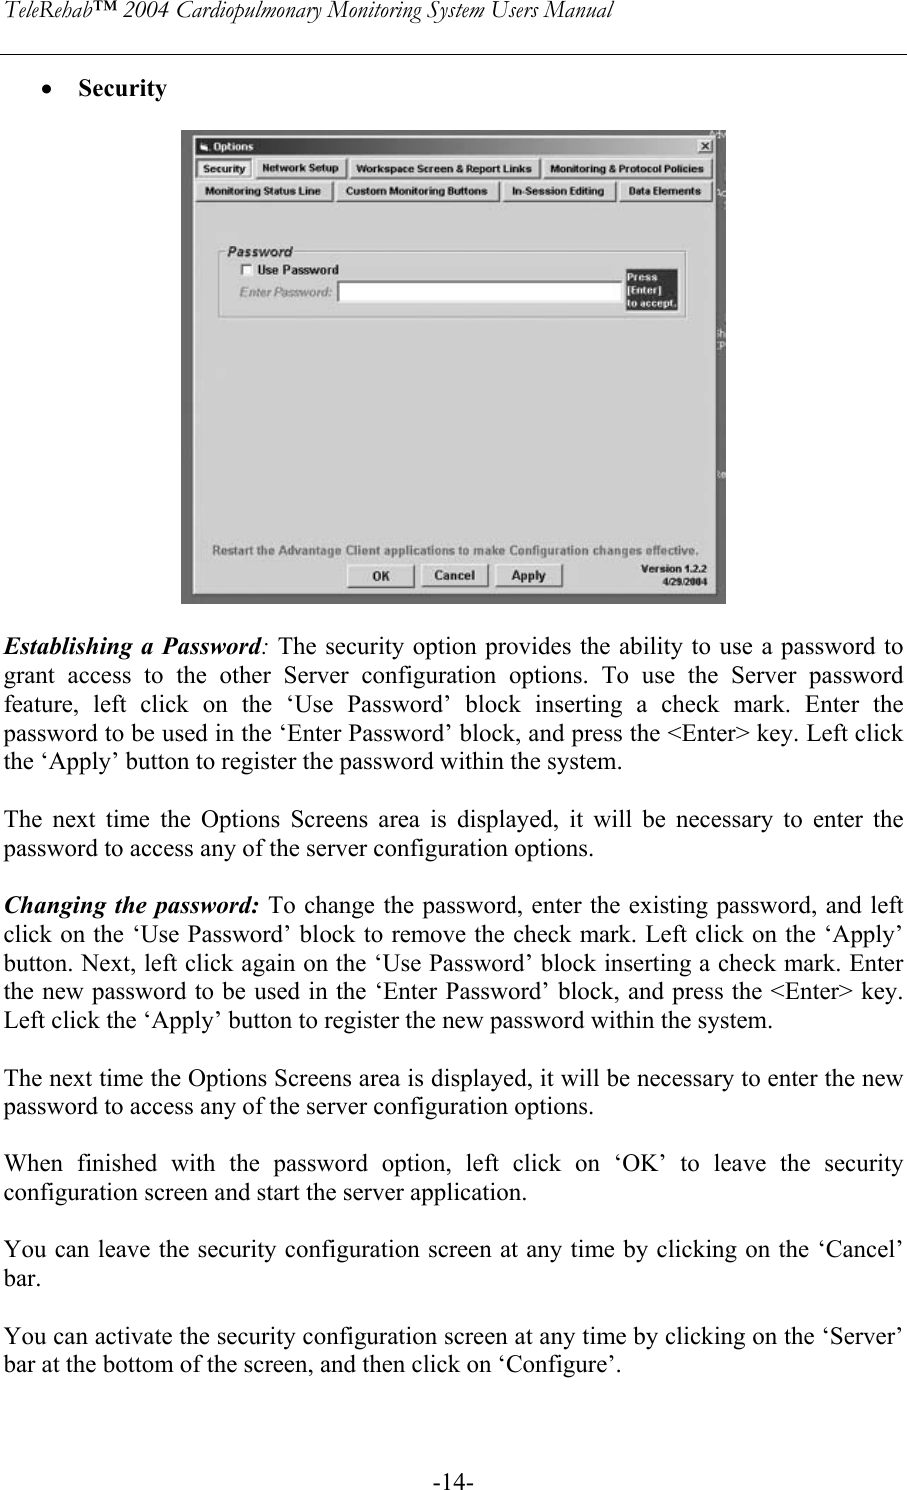 TeleRehab™ 2004 Cardiopulmonary Monitoring System Users Manual    -14-• Security     Establishing a Password: The security option provides the ability to use a password to grant access to the other Server configuration options. To use the Server password feature, left click on the ‘Use Password’ block inserting a check mark. Enter the password to be used in the ‘Enter Password’ block, and press the &lt;Enter&gt; key. Left click the ‘Apply’ button to register the password within the system.  The next time the Options Screens area is displayed, it will be necessary to enter the password to access any of the server configuration options.  Changing the password: To change the password, enter the existing password, and left click on the ‘Use Password’ block to remove the check mark. Left click on the ‘Apply’ button. Next, left click again on the ‘Use Password’ block inserting a check mark. Enter the new password to be used in the ‘Enter Password’ block, and press the &lt;Enter&gt; key. Left click the ‘Apply’ button to register the new password within the system.  The next time the Options Screens area is displayed, it will be necessary to enter the new password to access any of the server configuration options.  When finished with the password option, left click on ‘OK’ to leave the security configuration screen and start the server application.    You can leave the security configuration screen at any time by clicking on the ‘Cancel’ bar.  You can activate the security configuration screen at any time by clicking on the ‘Server’ bar at the bottom of the screen, and then click on ‘Configure’.  